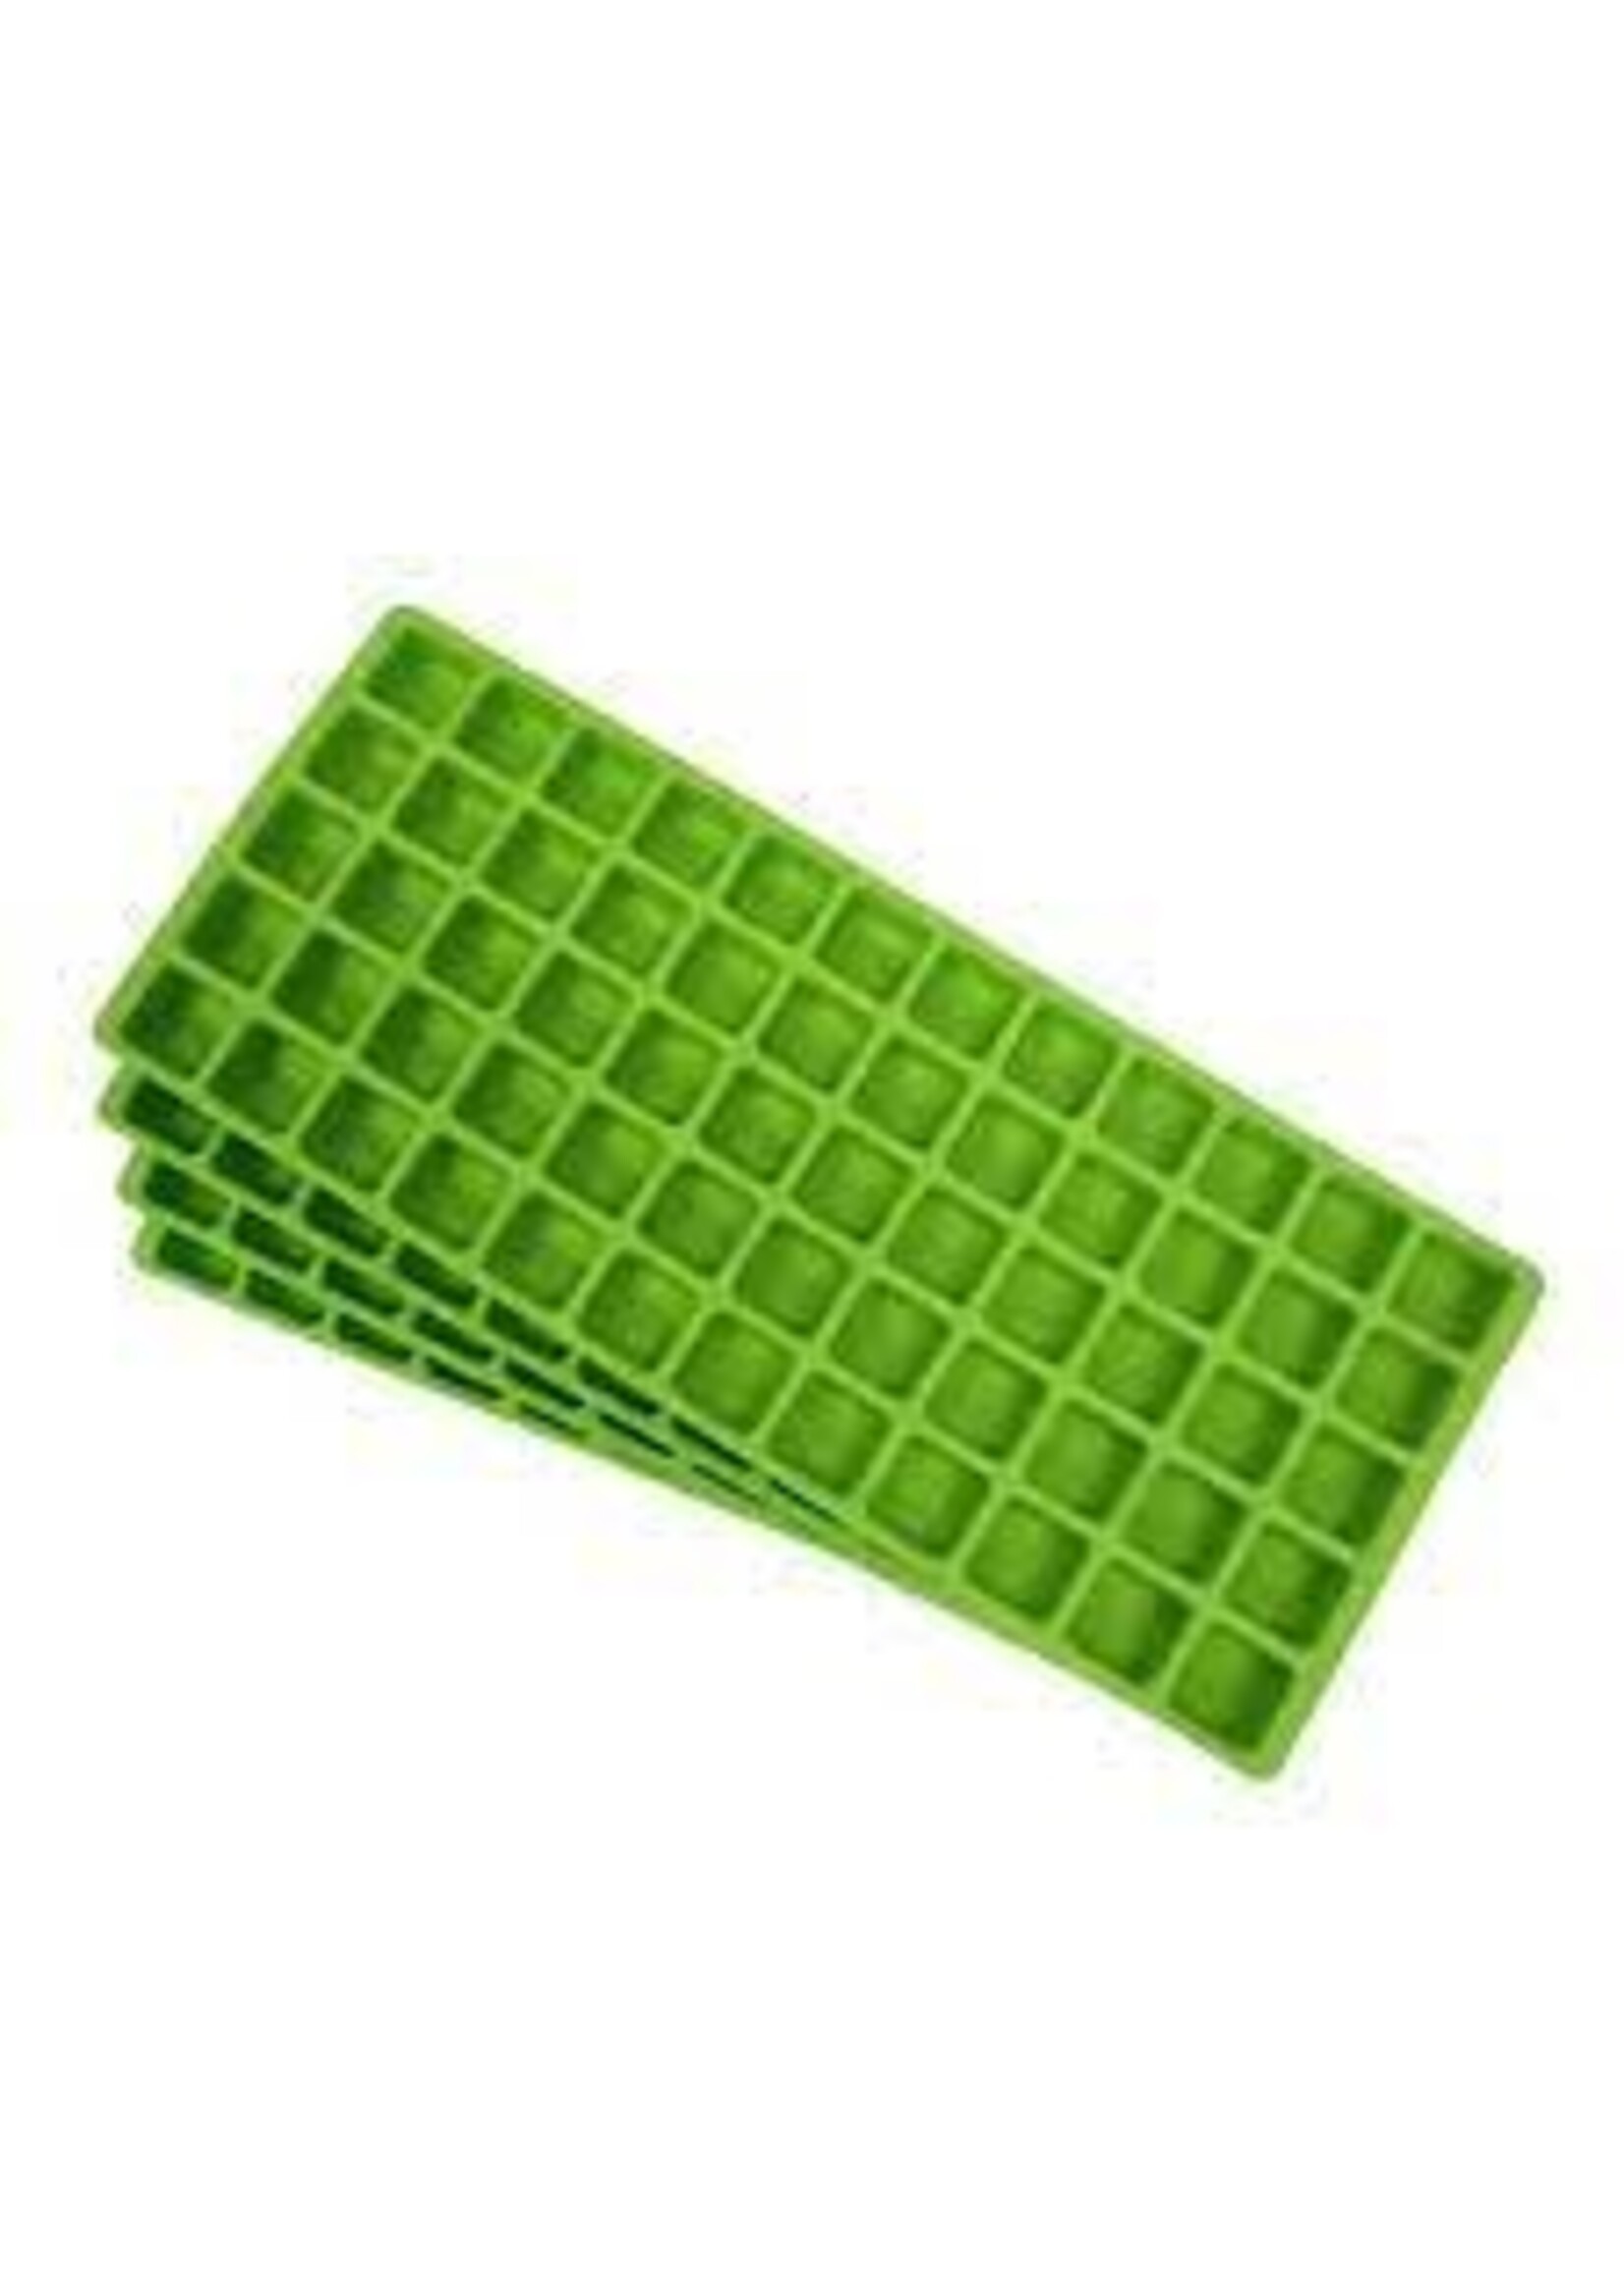 Harvest Right Harvest Right Silicone Food Molds M (Set of 4) - Mr. Green  Grow Supply